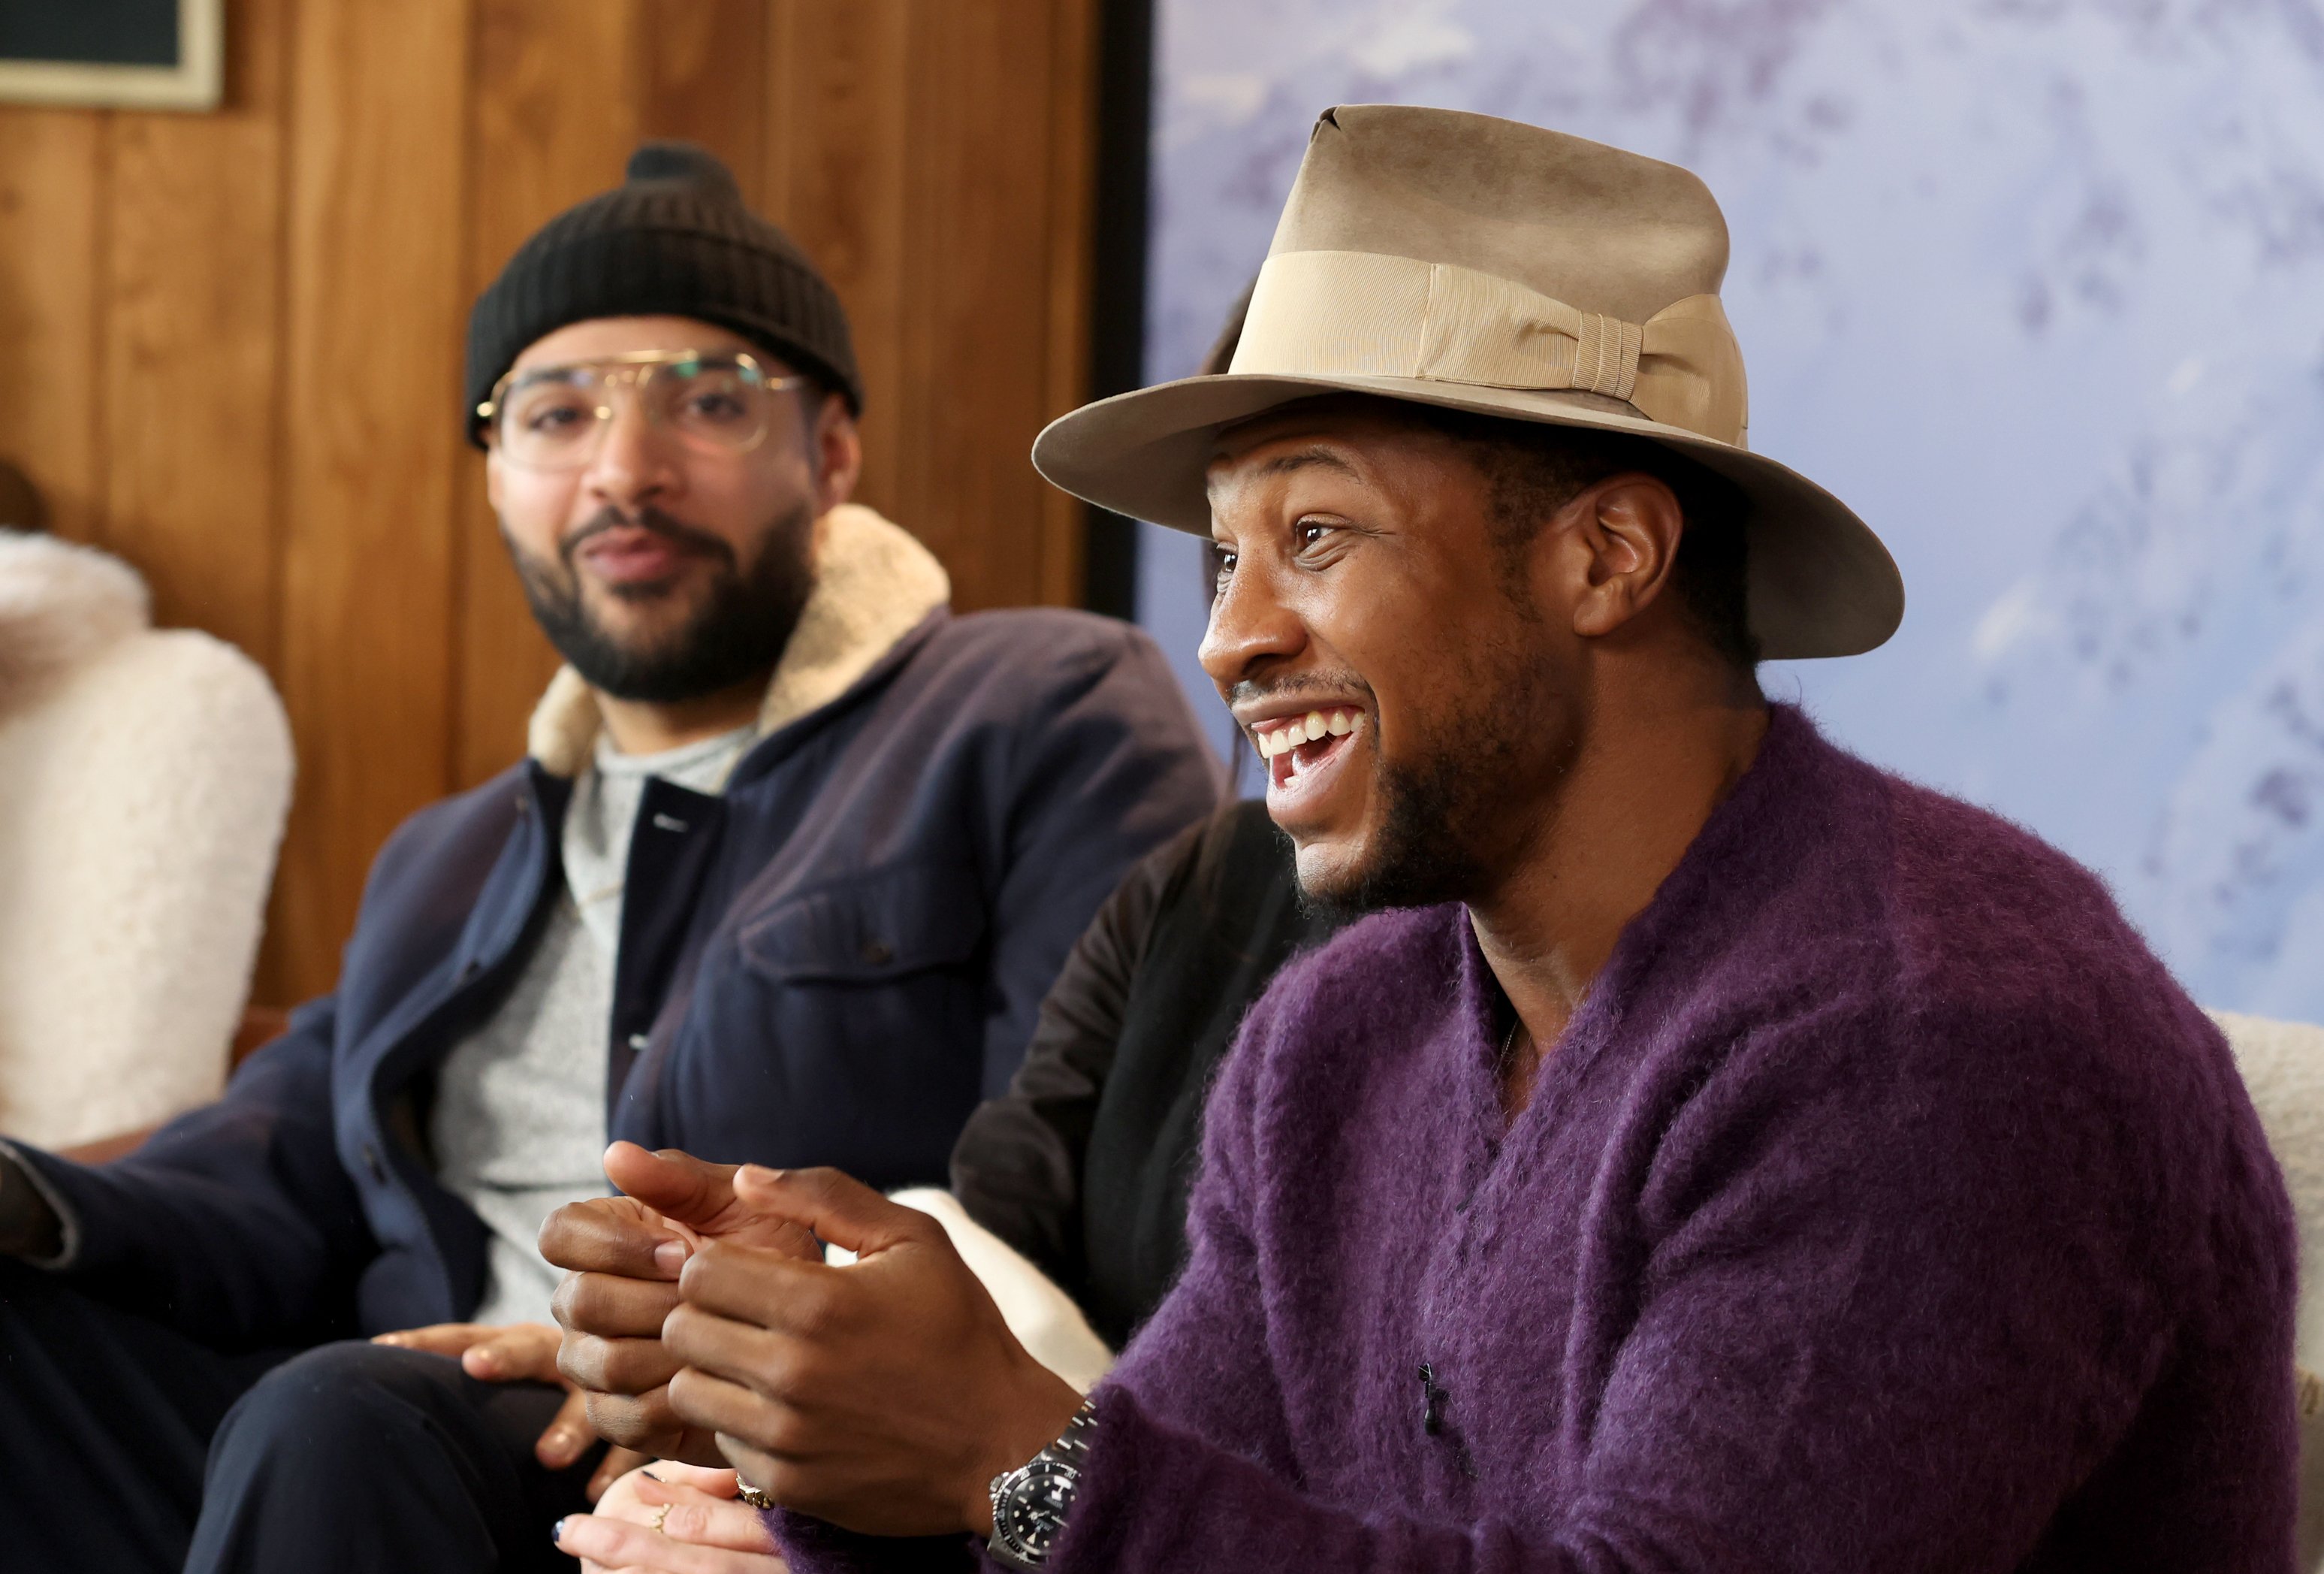 Elijah Bynum and Jonathan Majors at the Variety Sundance Studio, on January 21, 2023, in Park City, Utah. | Source: Getty Images